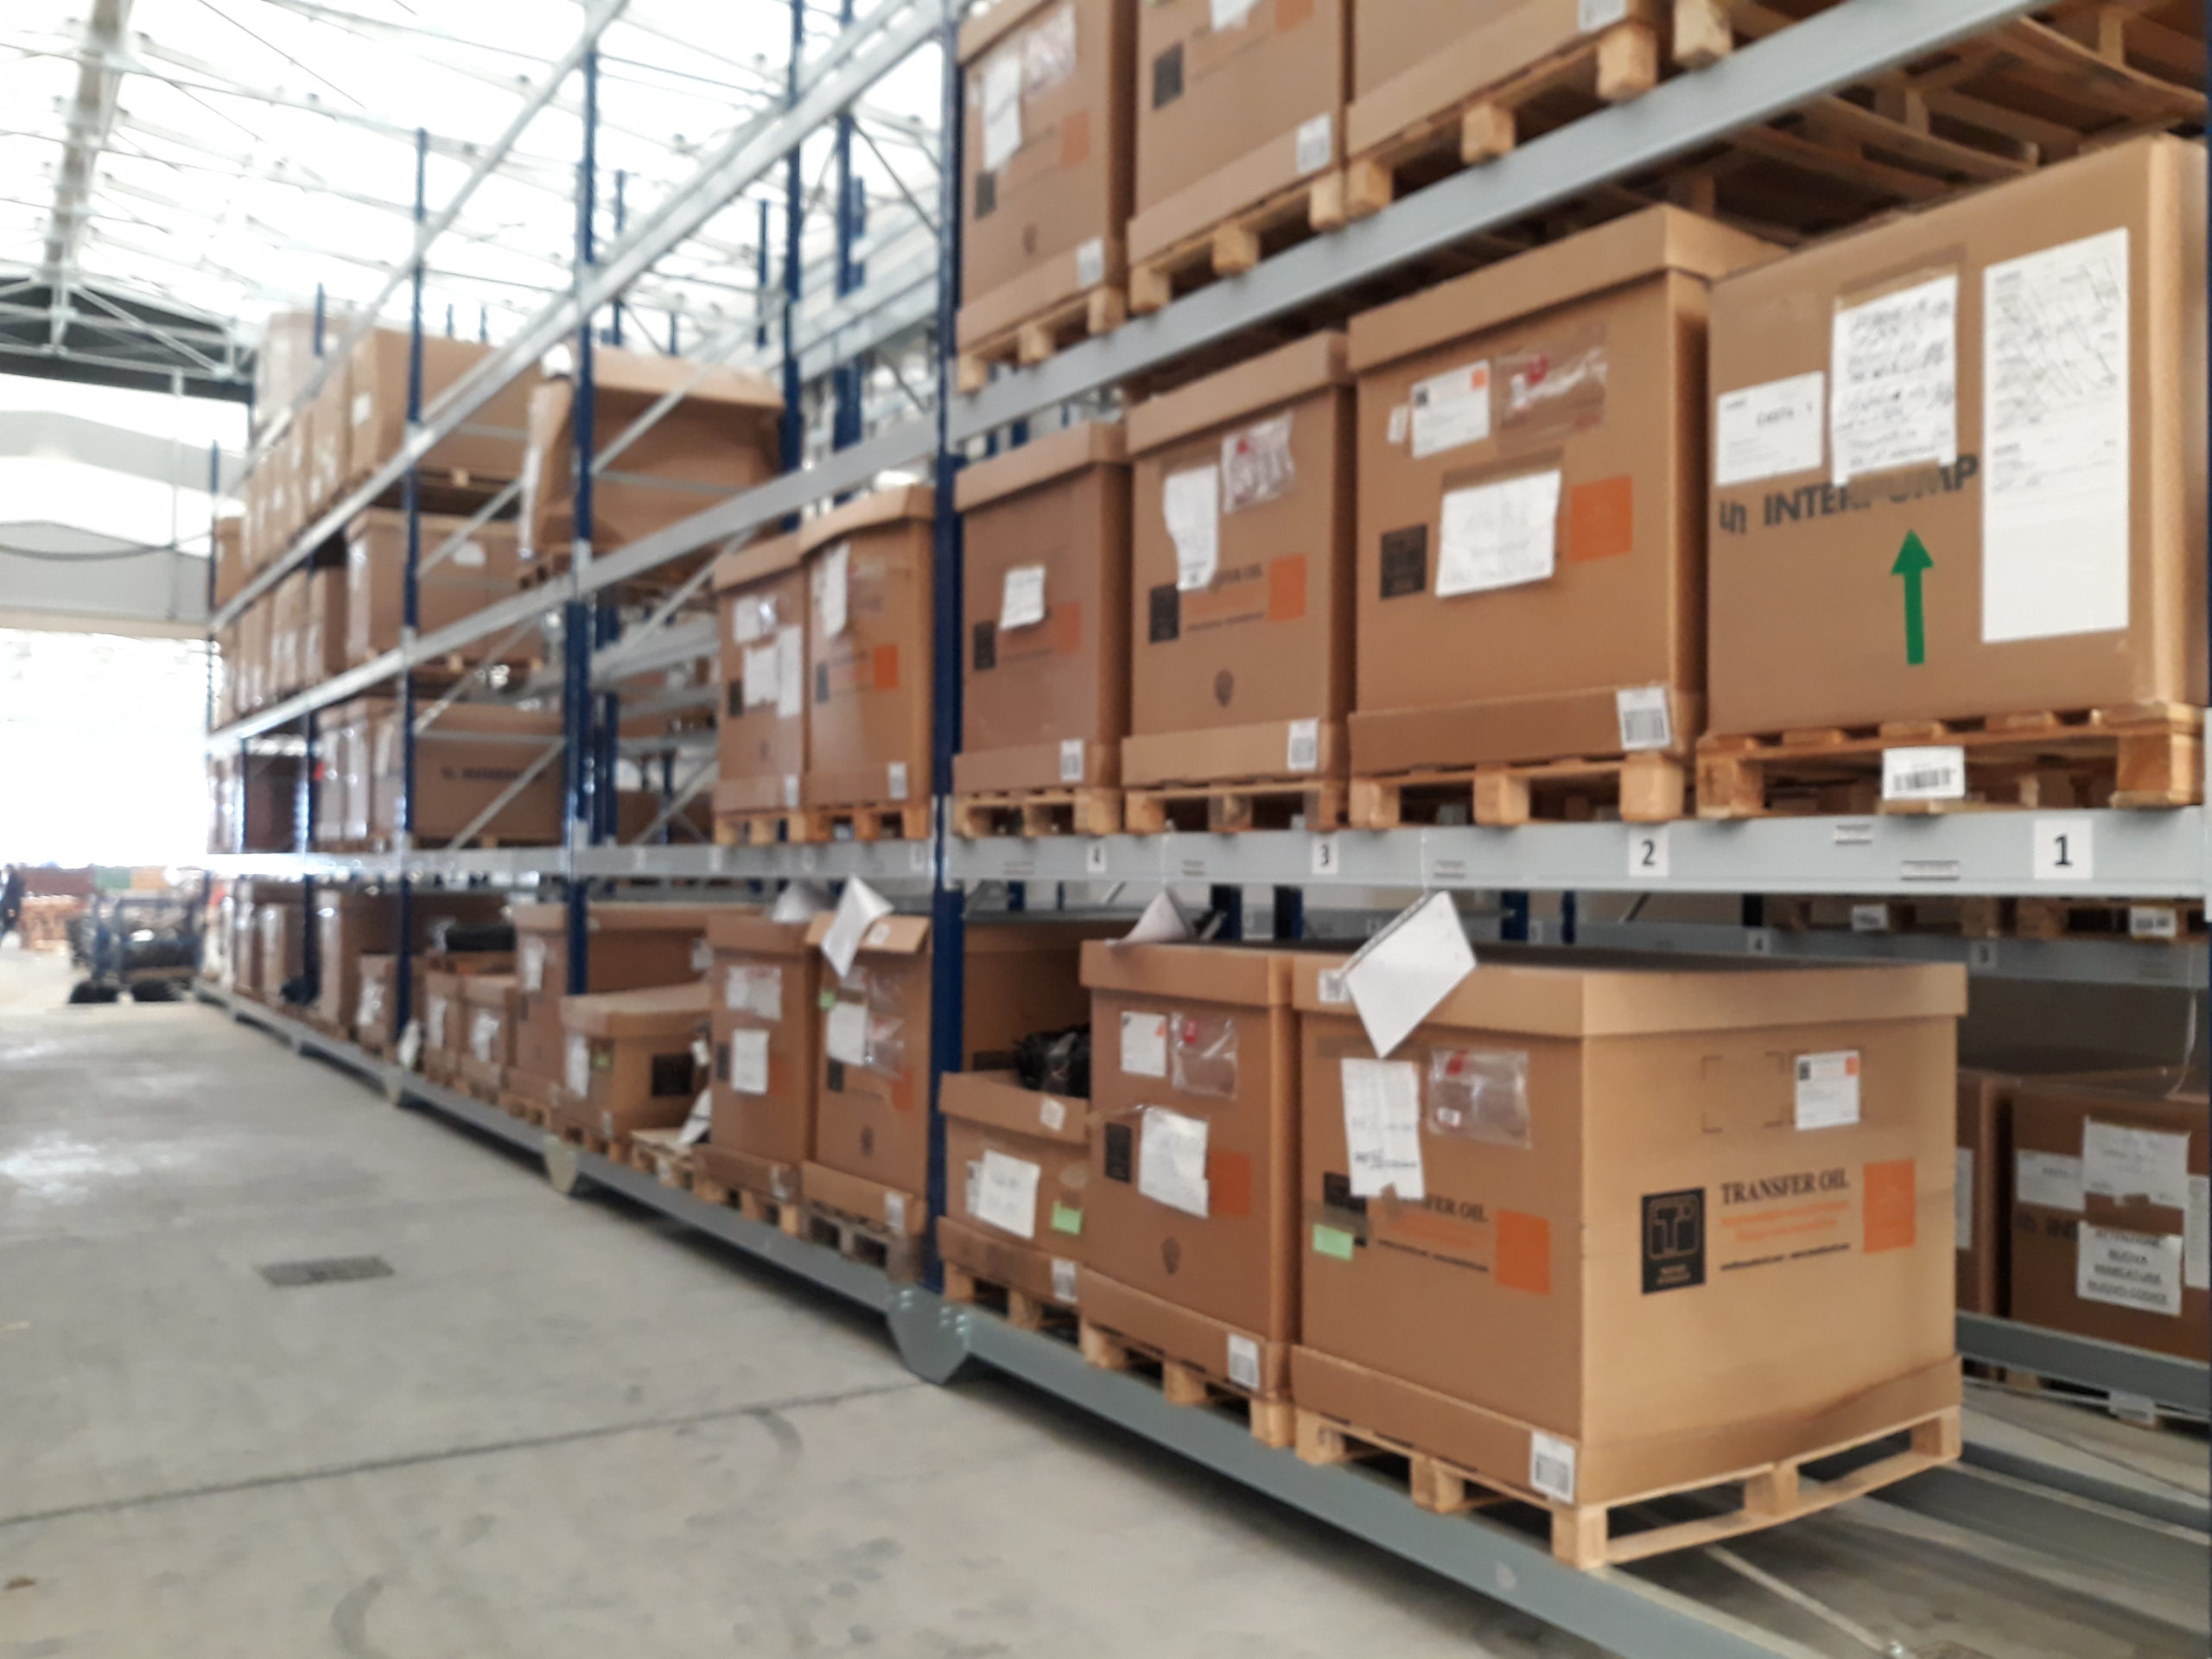 Mobile shelving systems